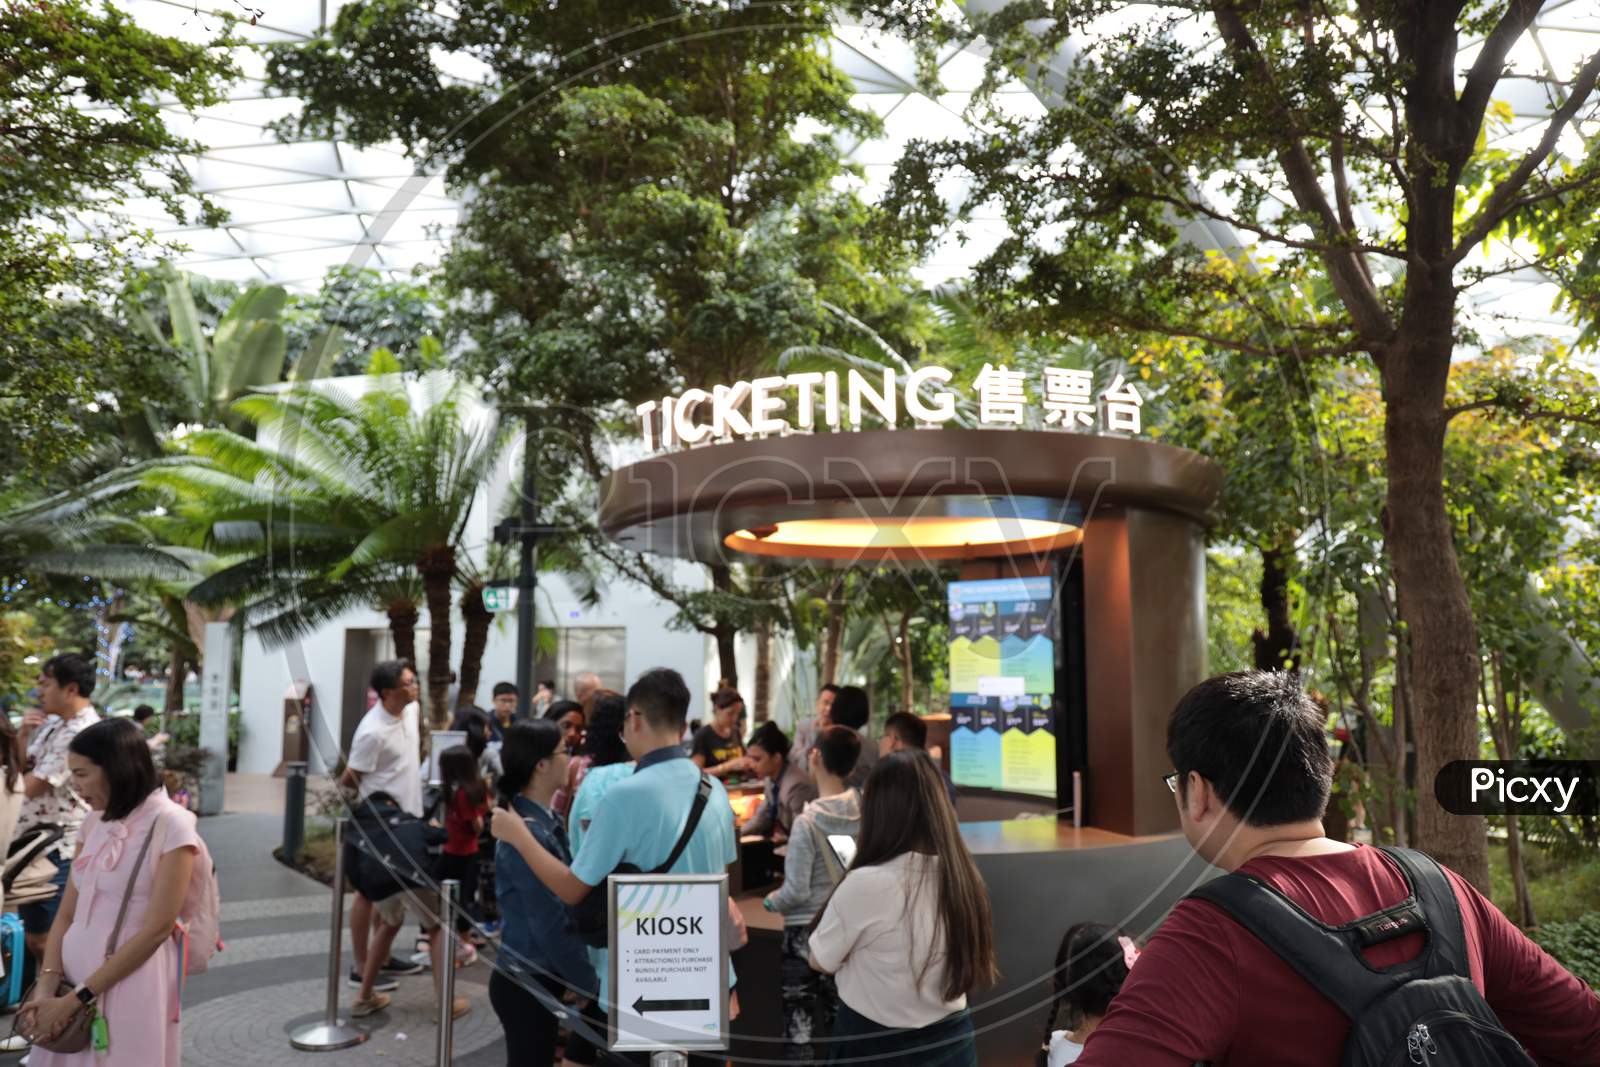 Ticketing Kisok At Canopy Bridge For Vortex Water Falls in Changi Airport , Singapore